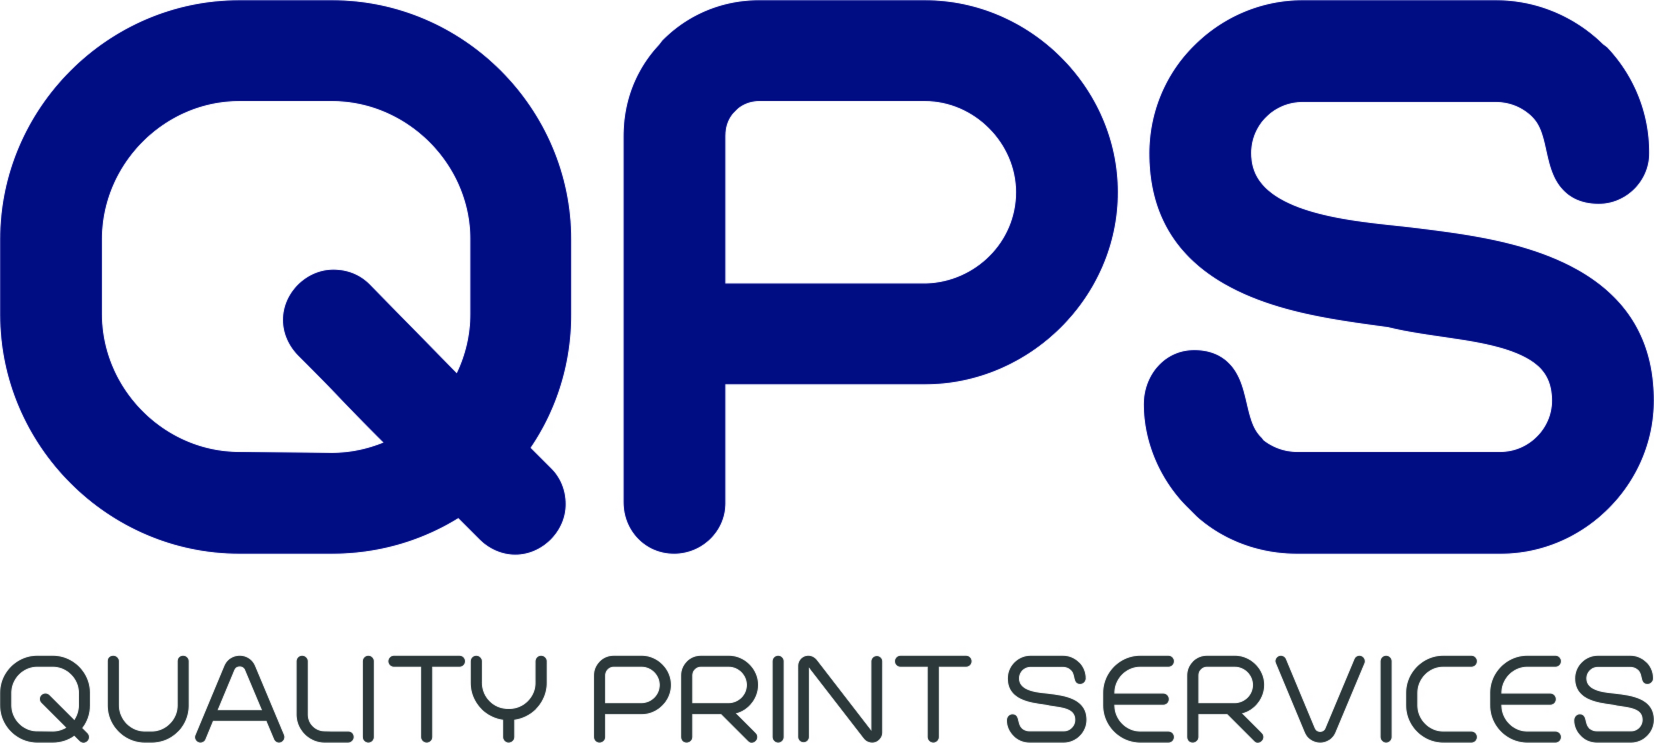 Quality Print Services 